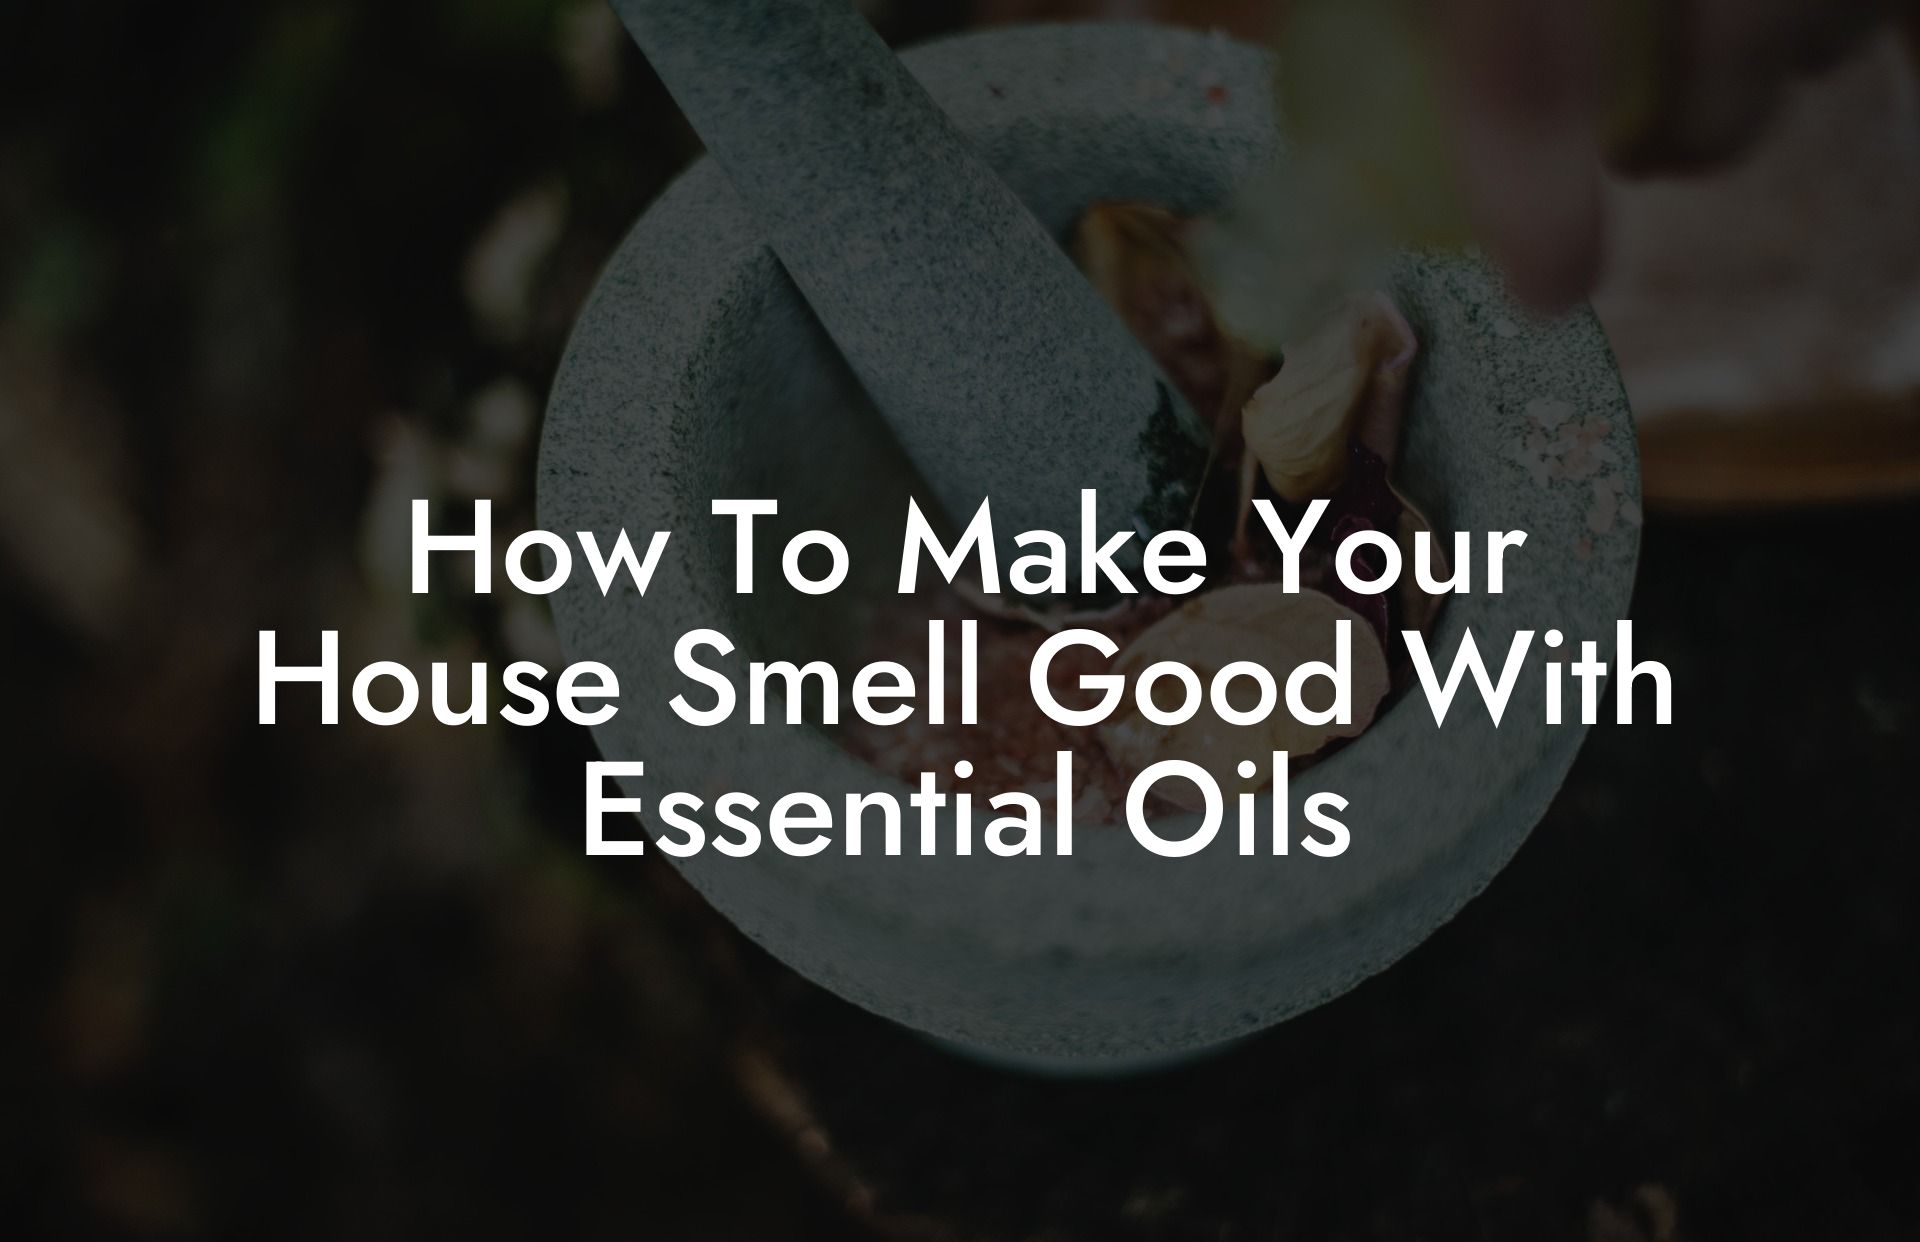 How To Make Your House Smell Good With Essential Oils